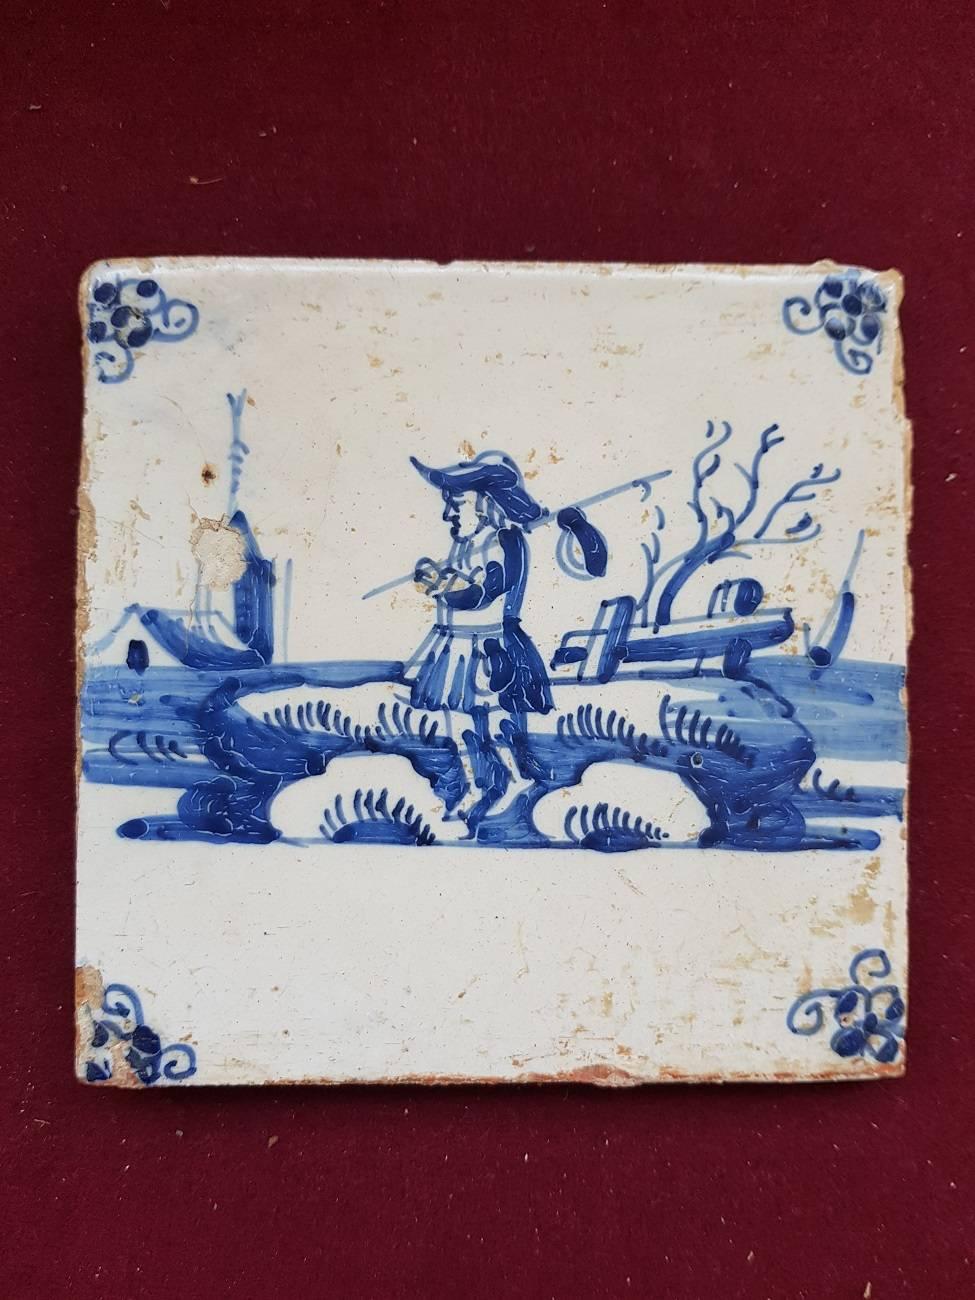 Late 18th early-19th century Delft blue tile with a hand painted scene of a person in open countryside,

The measurements are:
Depth 8 mm/ 0.3 inch.
Width 13 cm/ 5.1 inch.
Height 13 cm/ 5.1 inch.